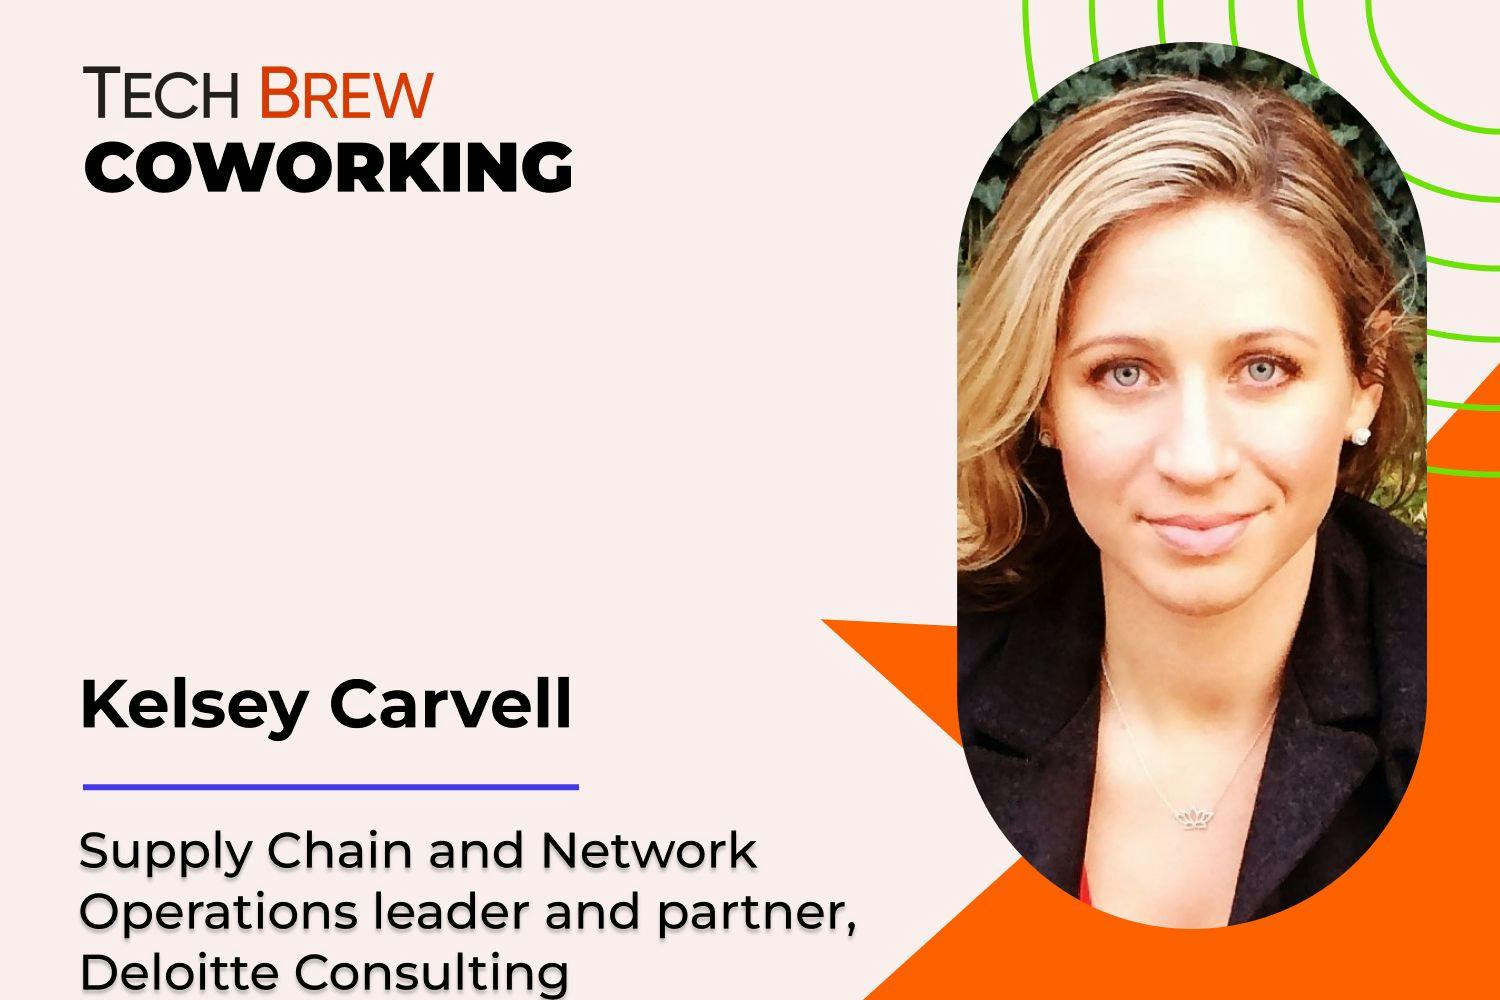 Graphic featuring a headshot of Deloitte Consulting’s Kelsey Carvell.